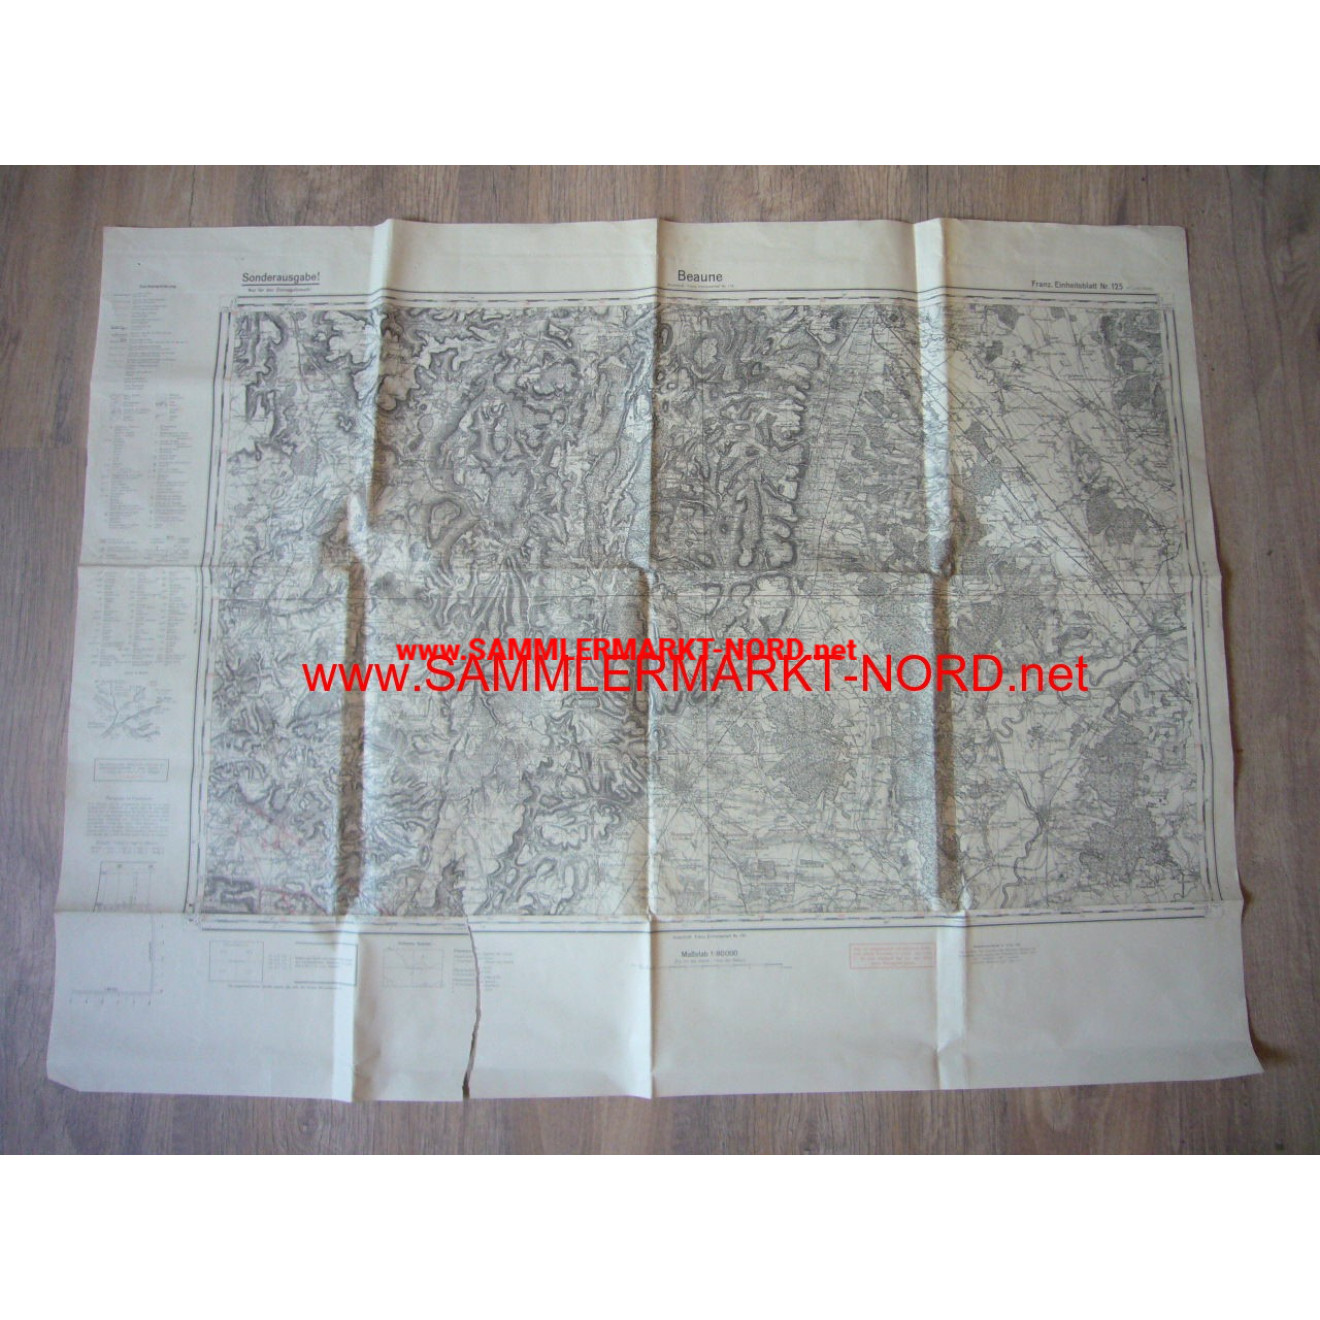 Wehrmacht Map - Special Edition BEAUNE (France)